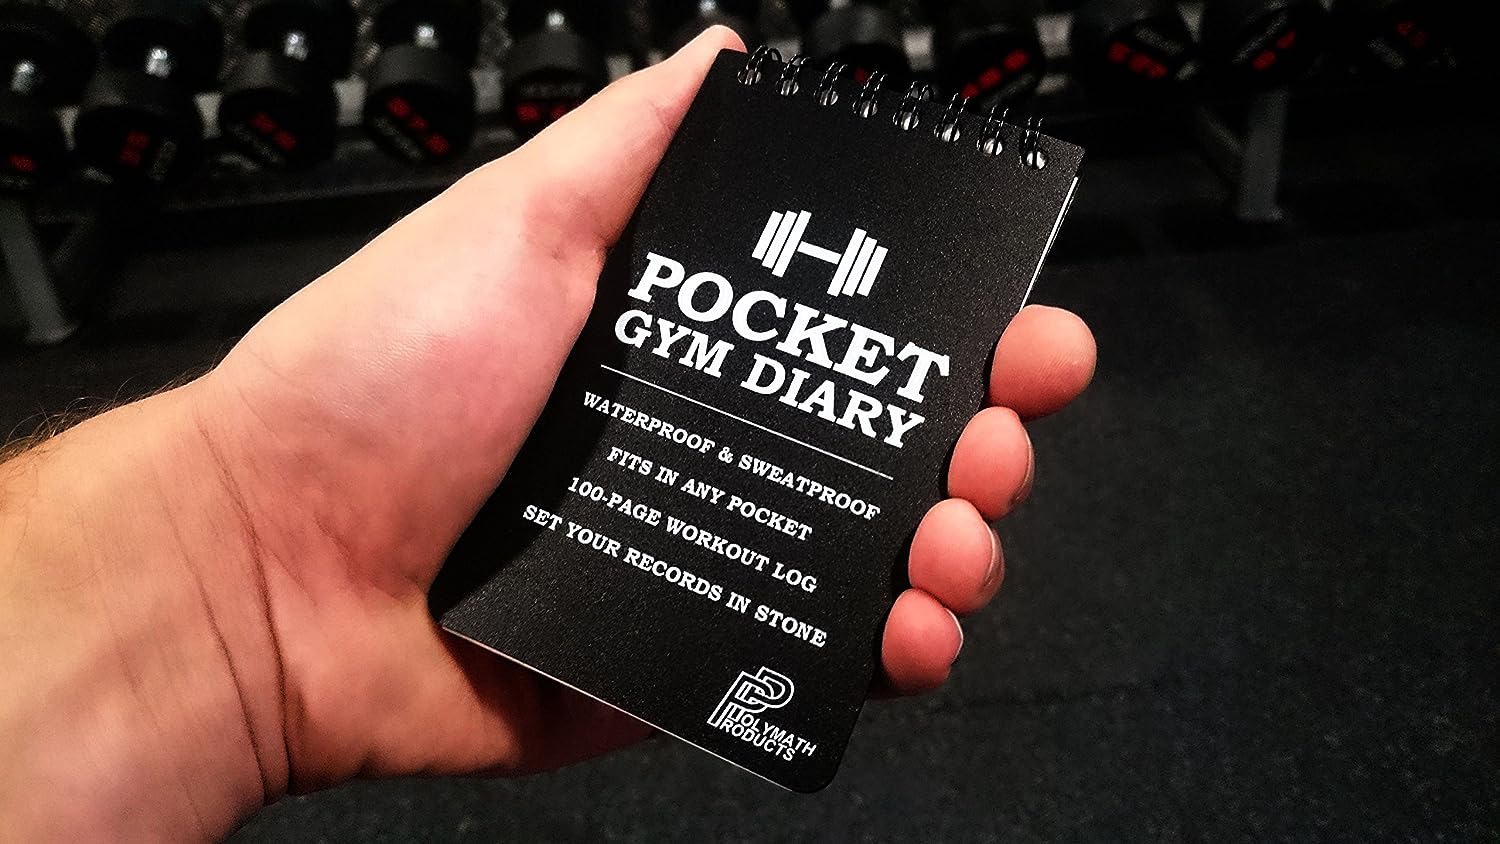 Pocket Gym Diary –100-page workout log. Handy size (3 x 5 inch) - fits in any pocket. 100% waterproof and sweatproof fitness training diary.